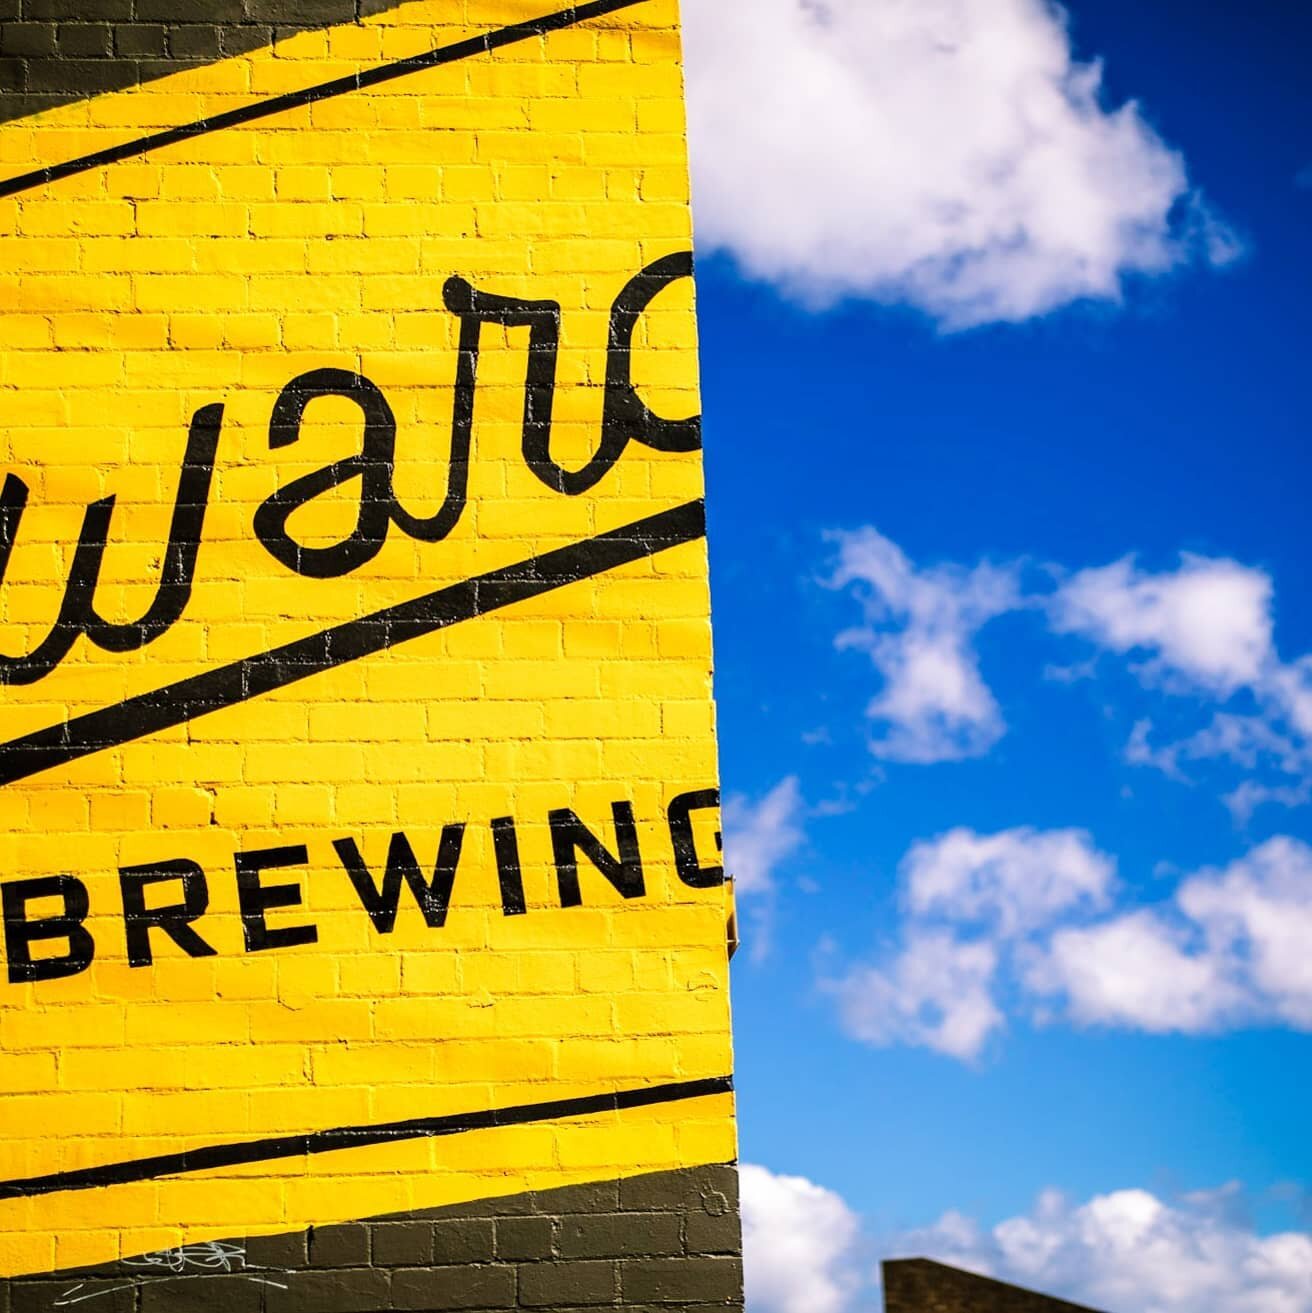 Got a couple of nice ones 📷 @waywardbrewing  yesterday. The new bar Reno is looking 🔥

#watchthisspace 🍻